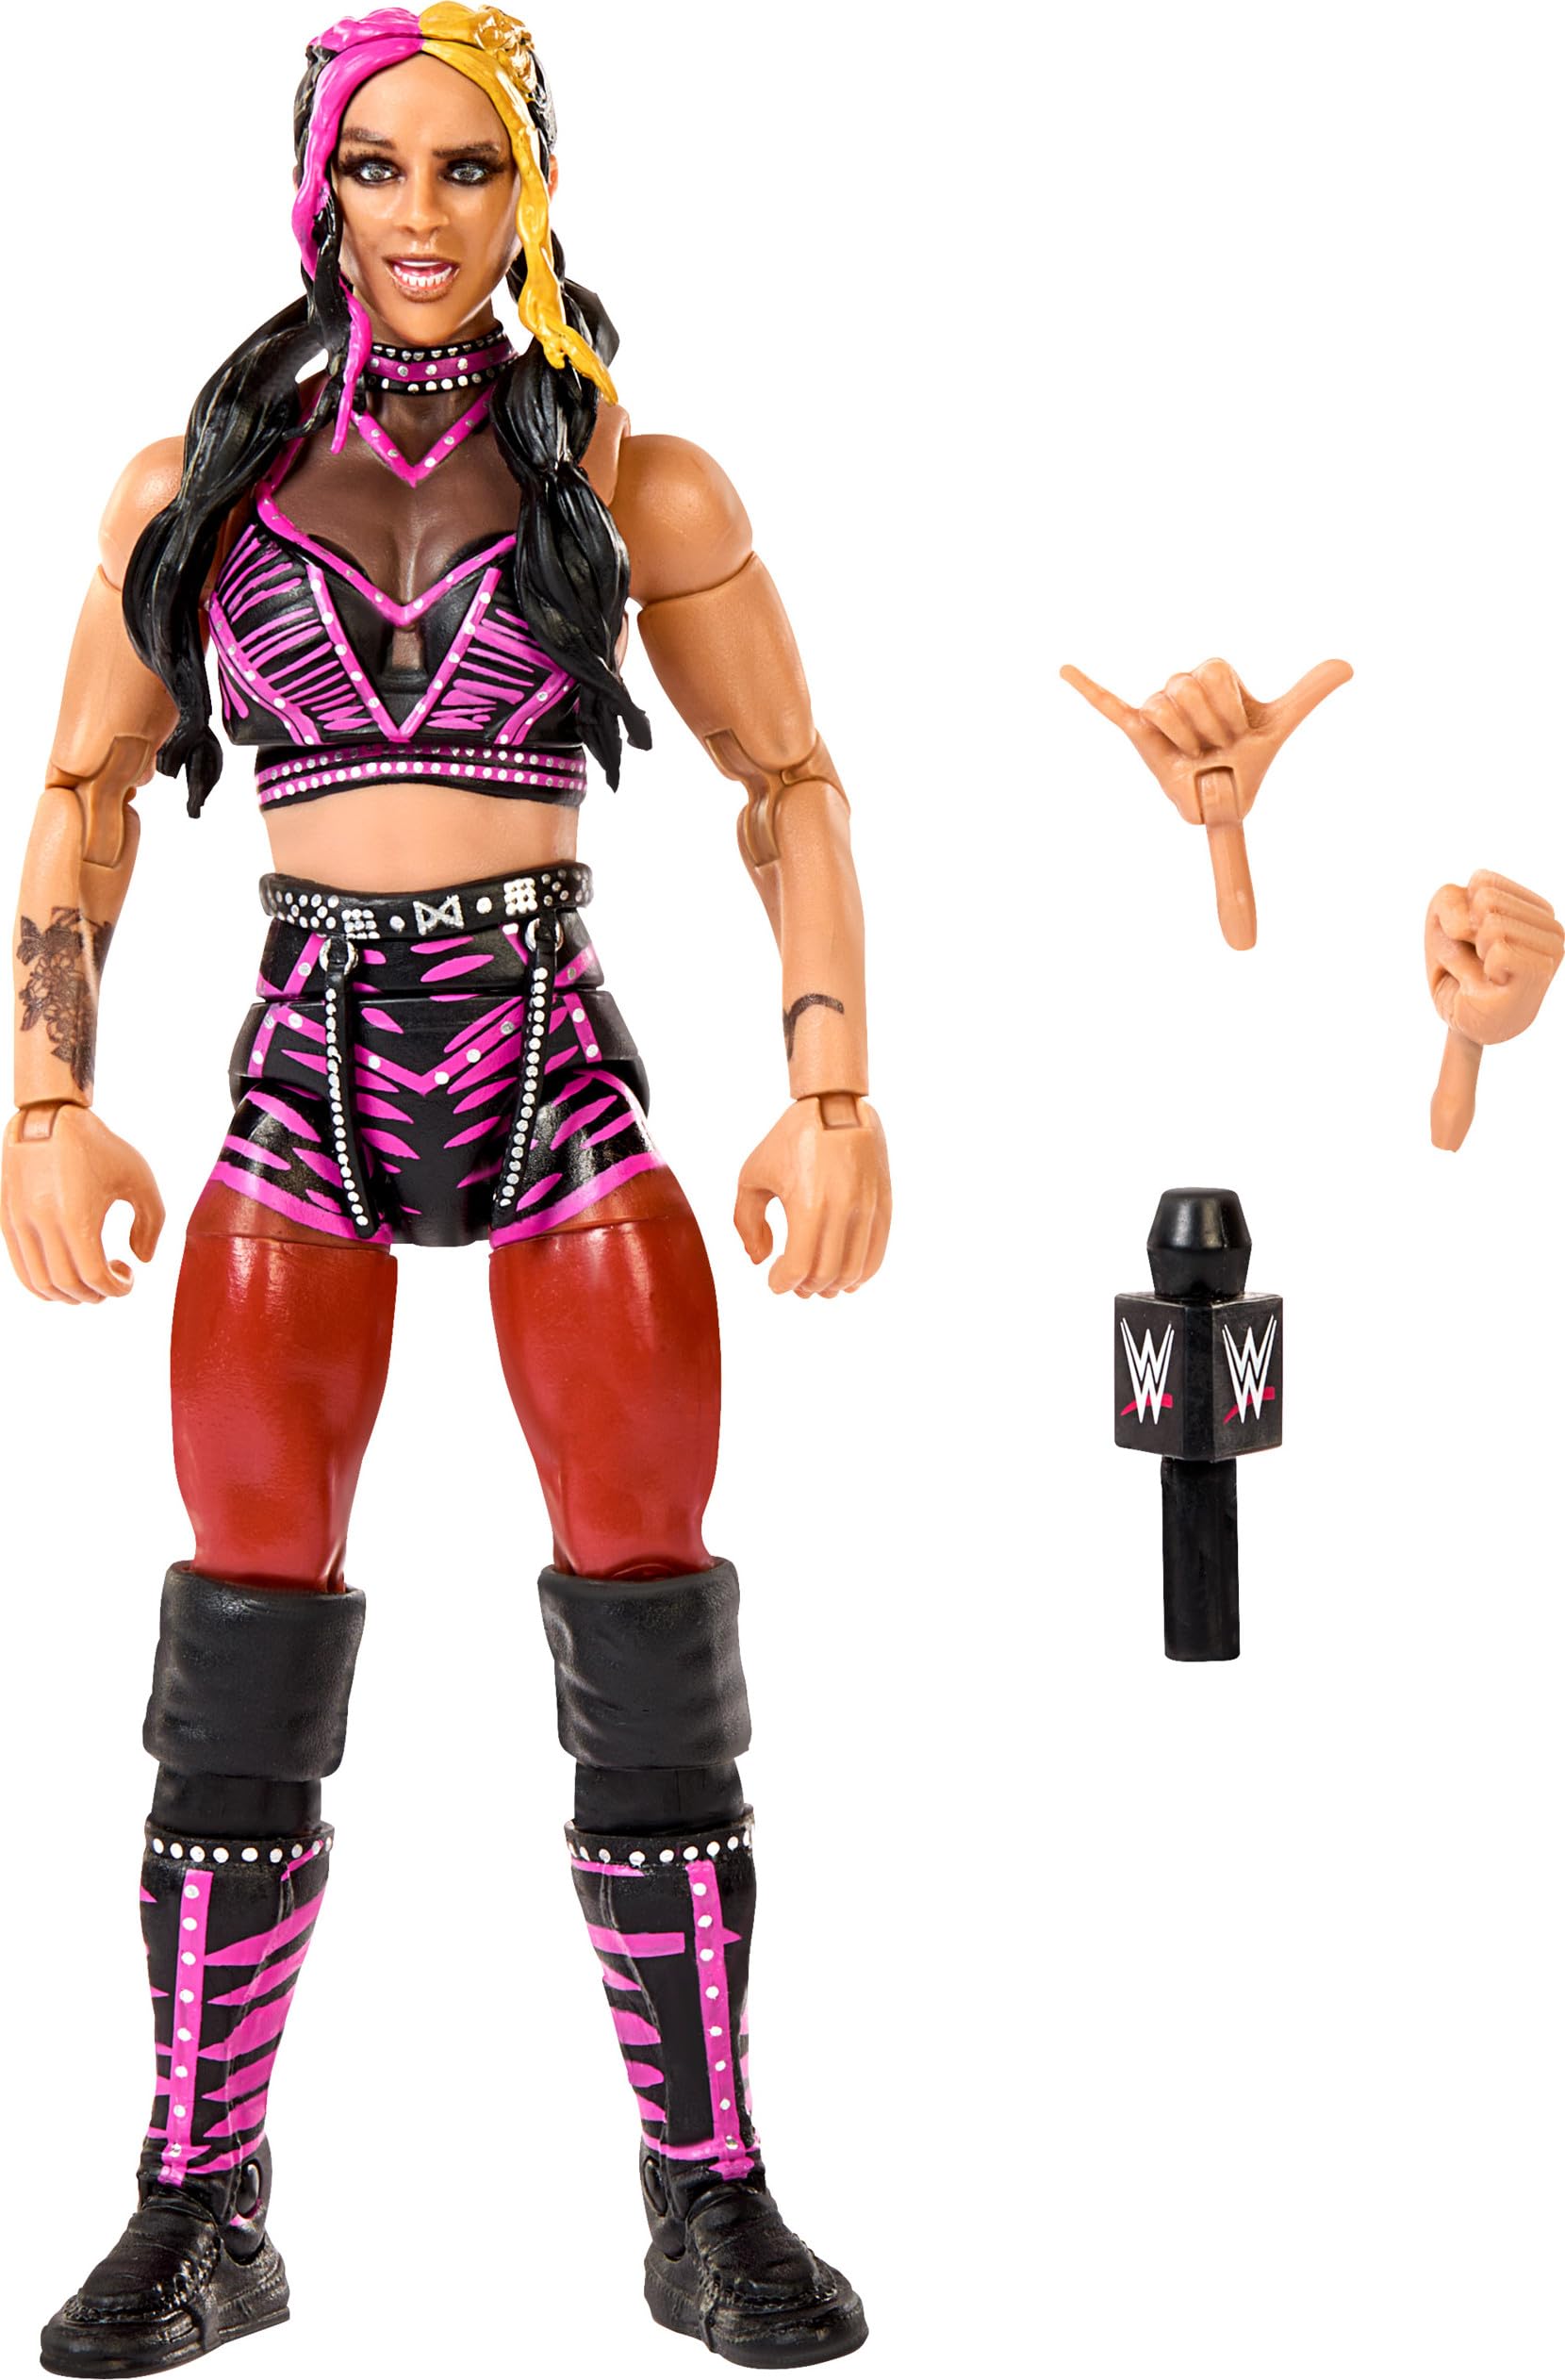 WWE Dakota Kai Elite Collection Action Figure with Accessories, Articulation & Life-Like Detail, Collectible Toy, 6-Inch